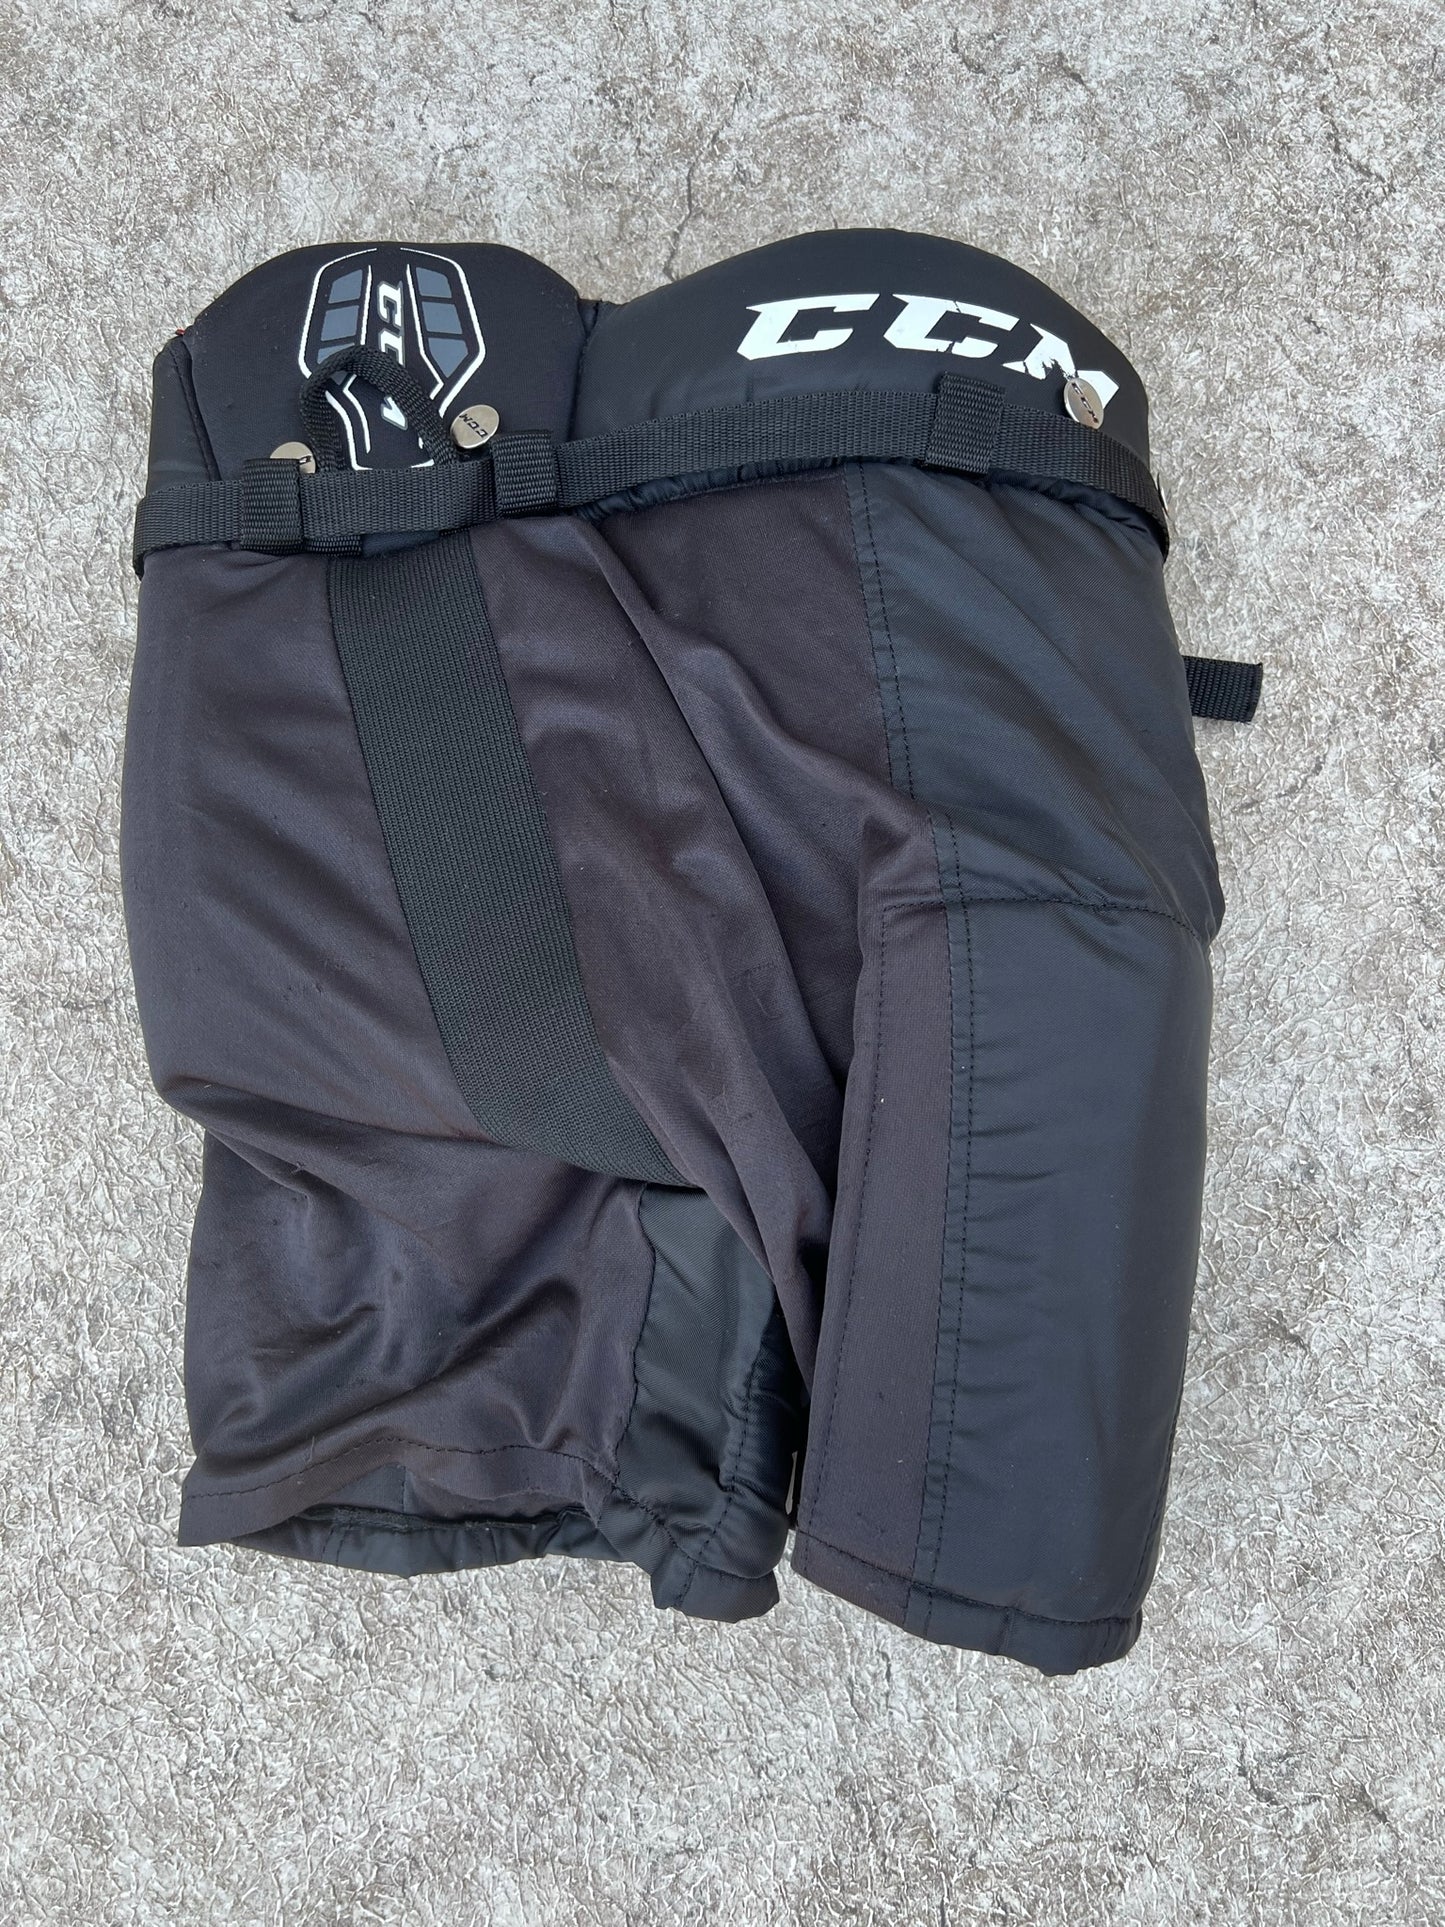 Hockey Pants Child Size Y Large CCM Black Red Excellent